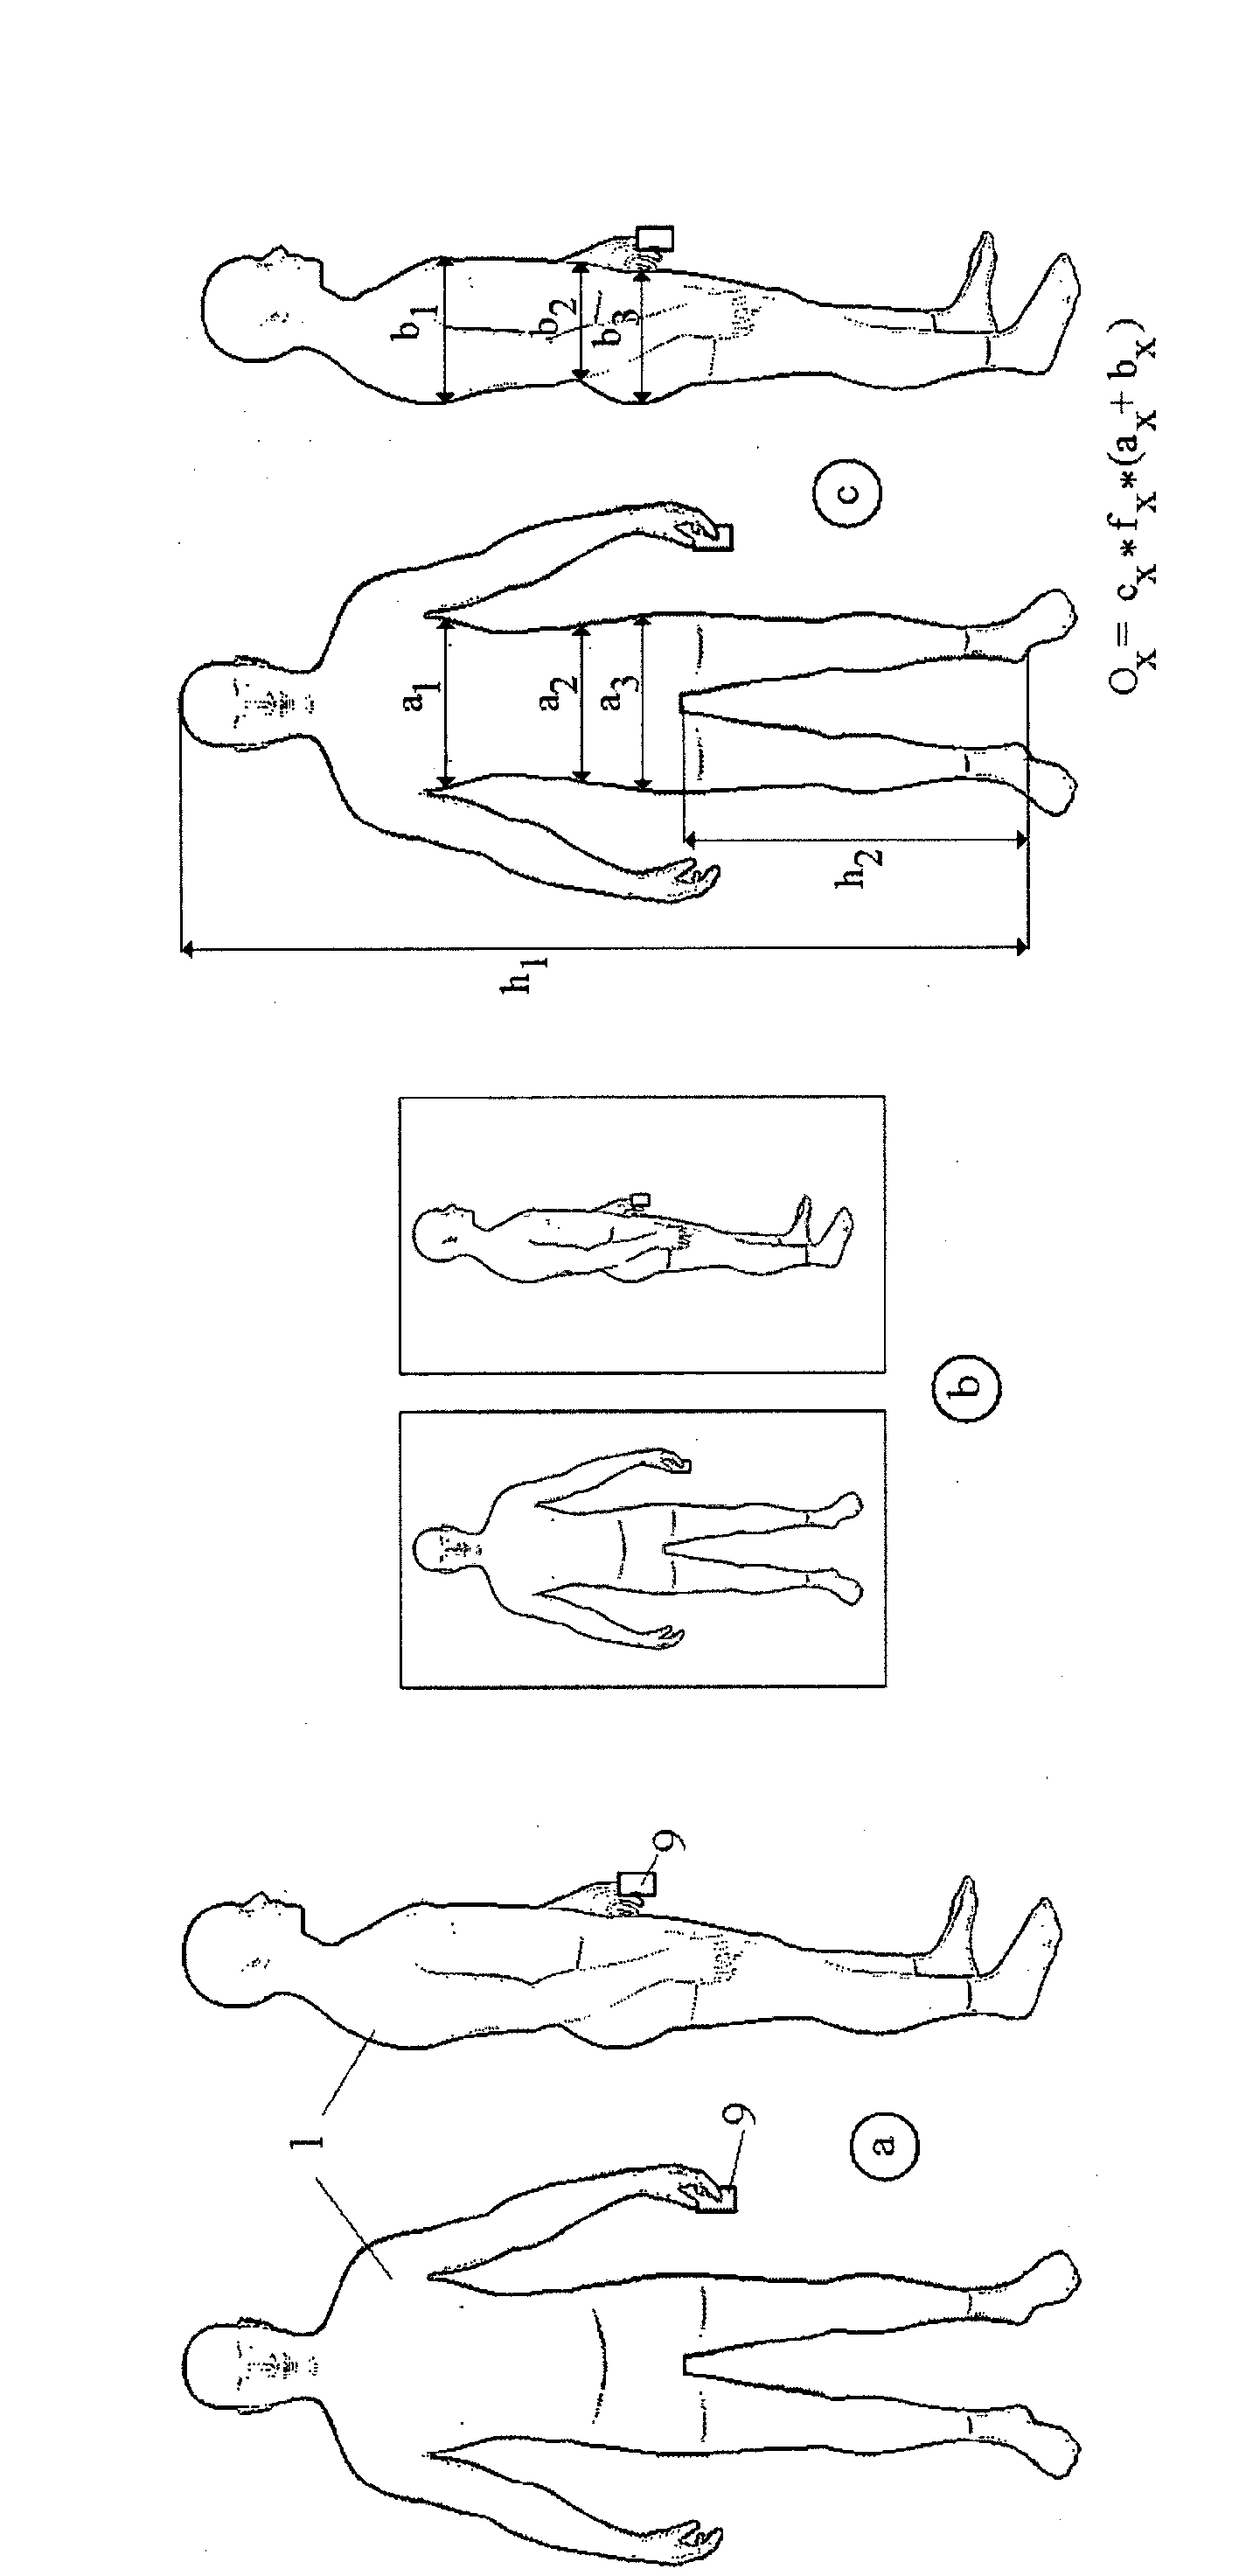 Method for remotely determining clothes dimensions